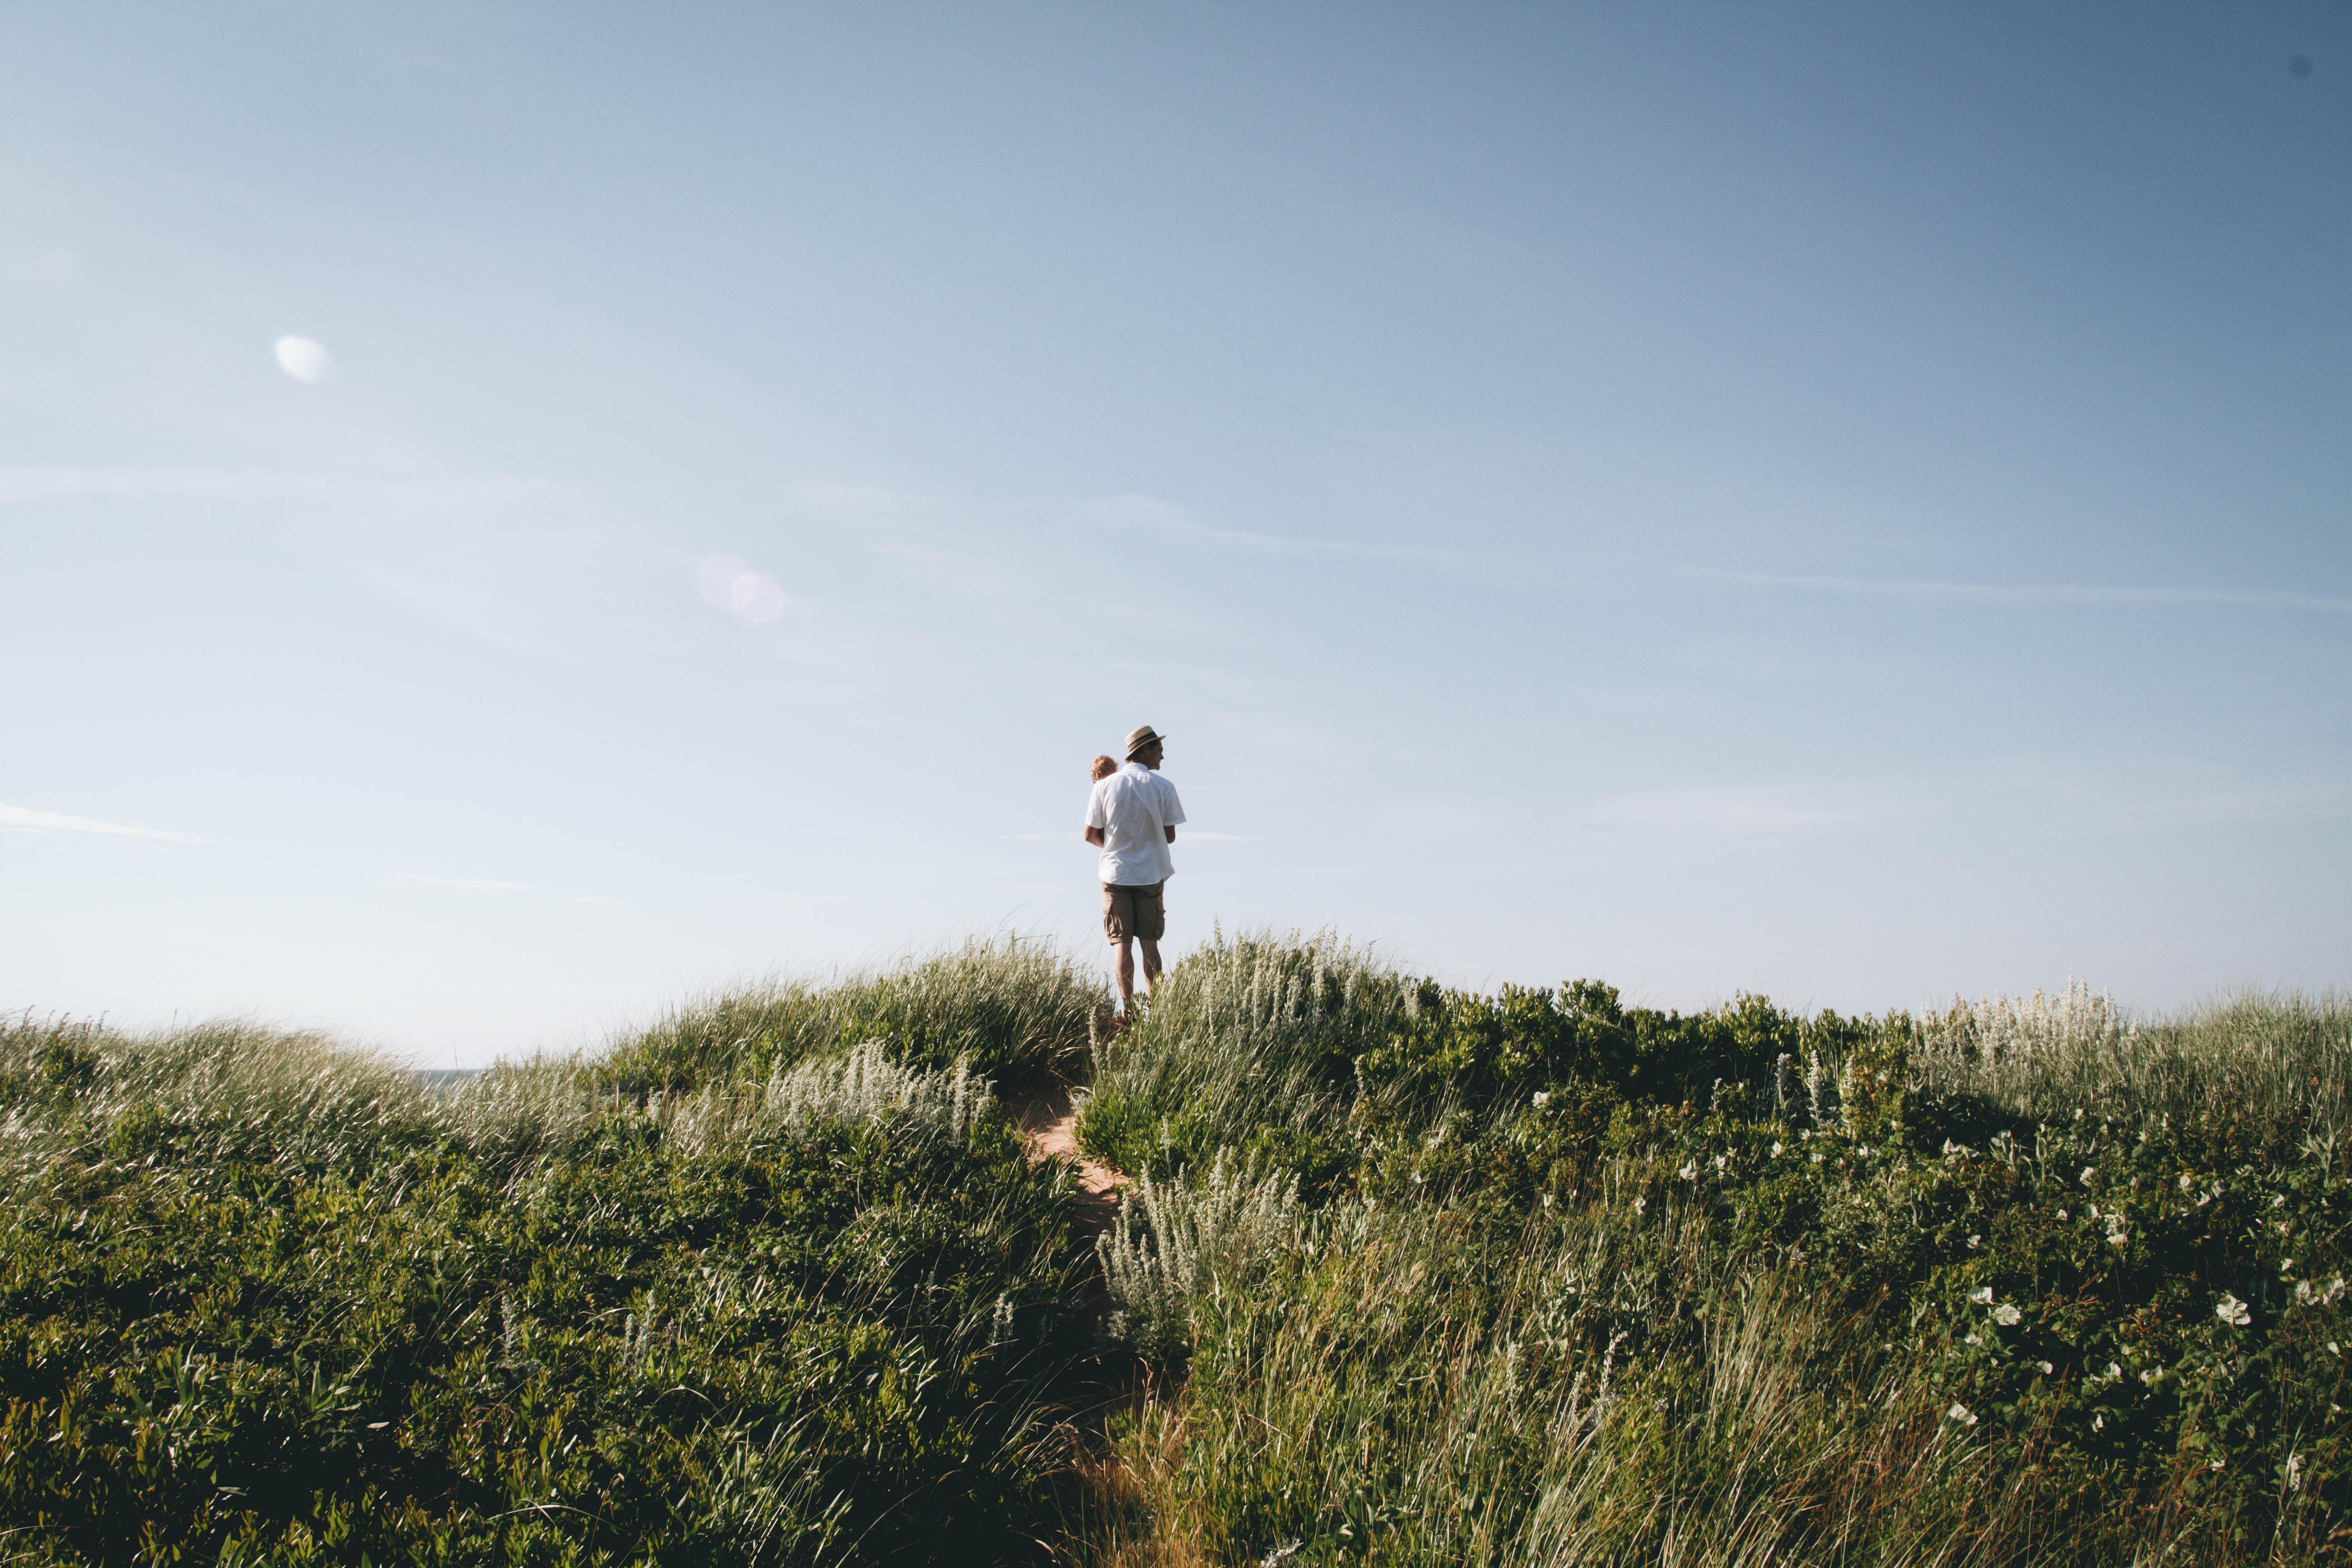 Stock image - Man and baby standing on Prince Edward Island, Canada - Photo by Natalie Toombs on Unsplash